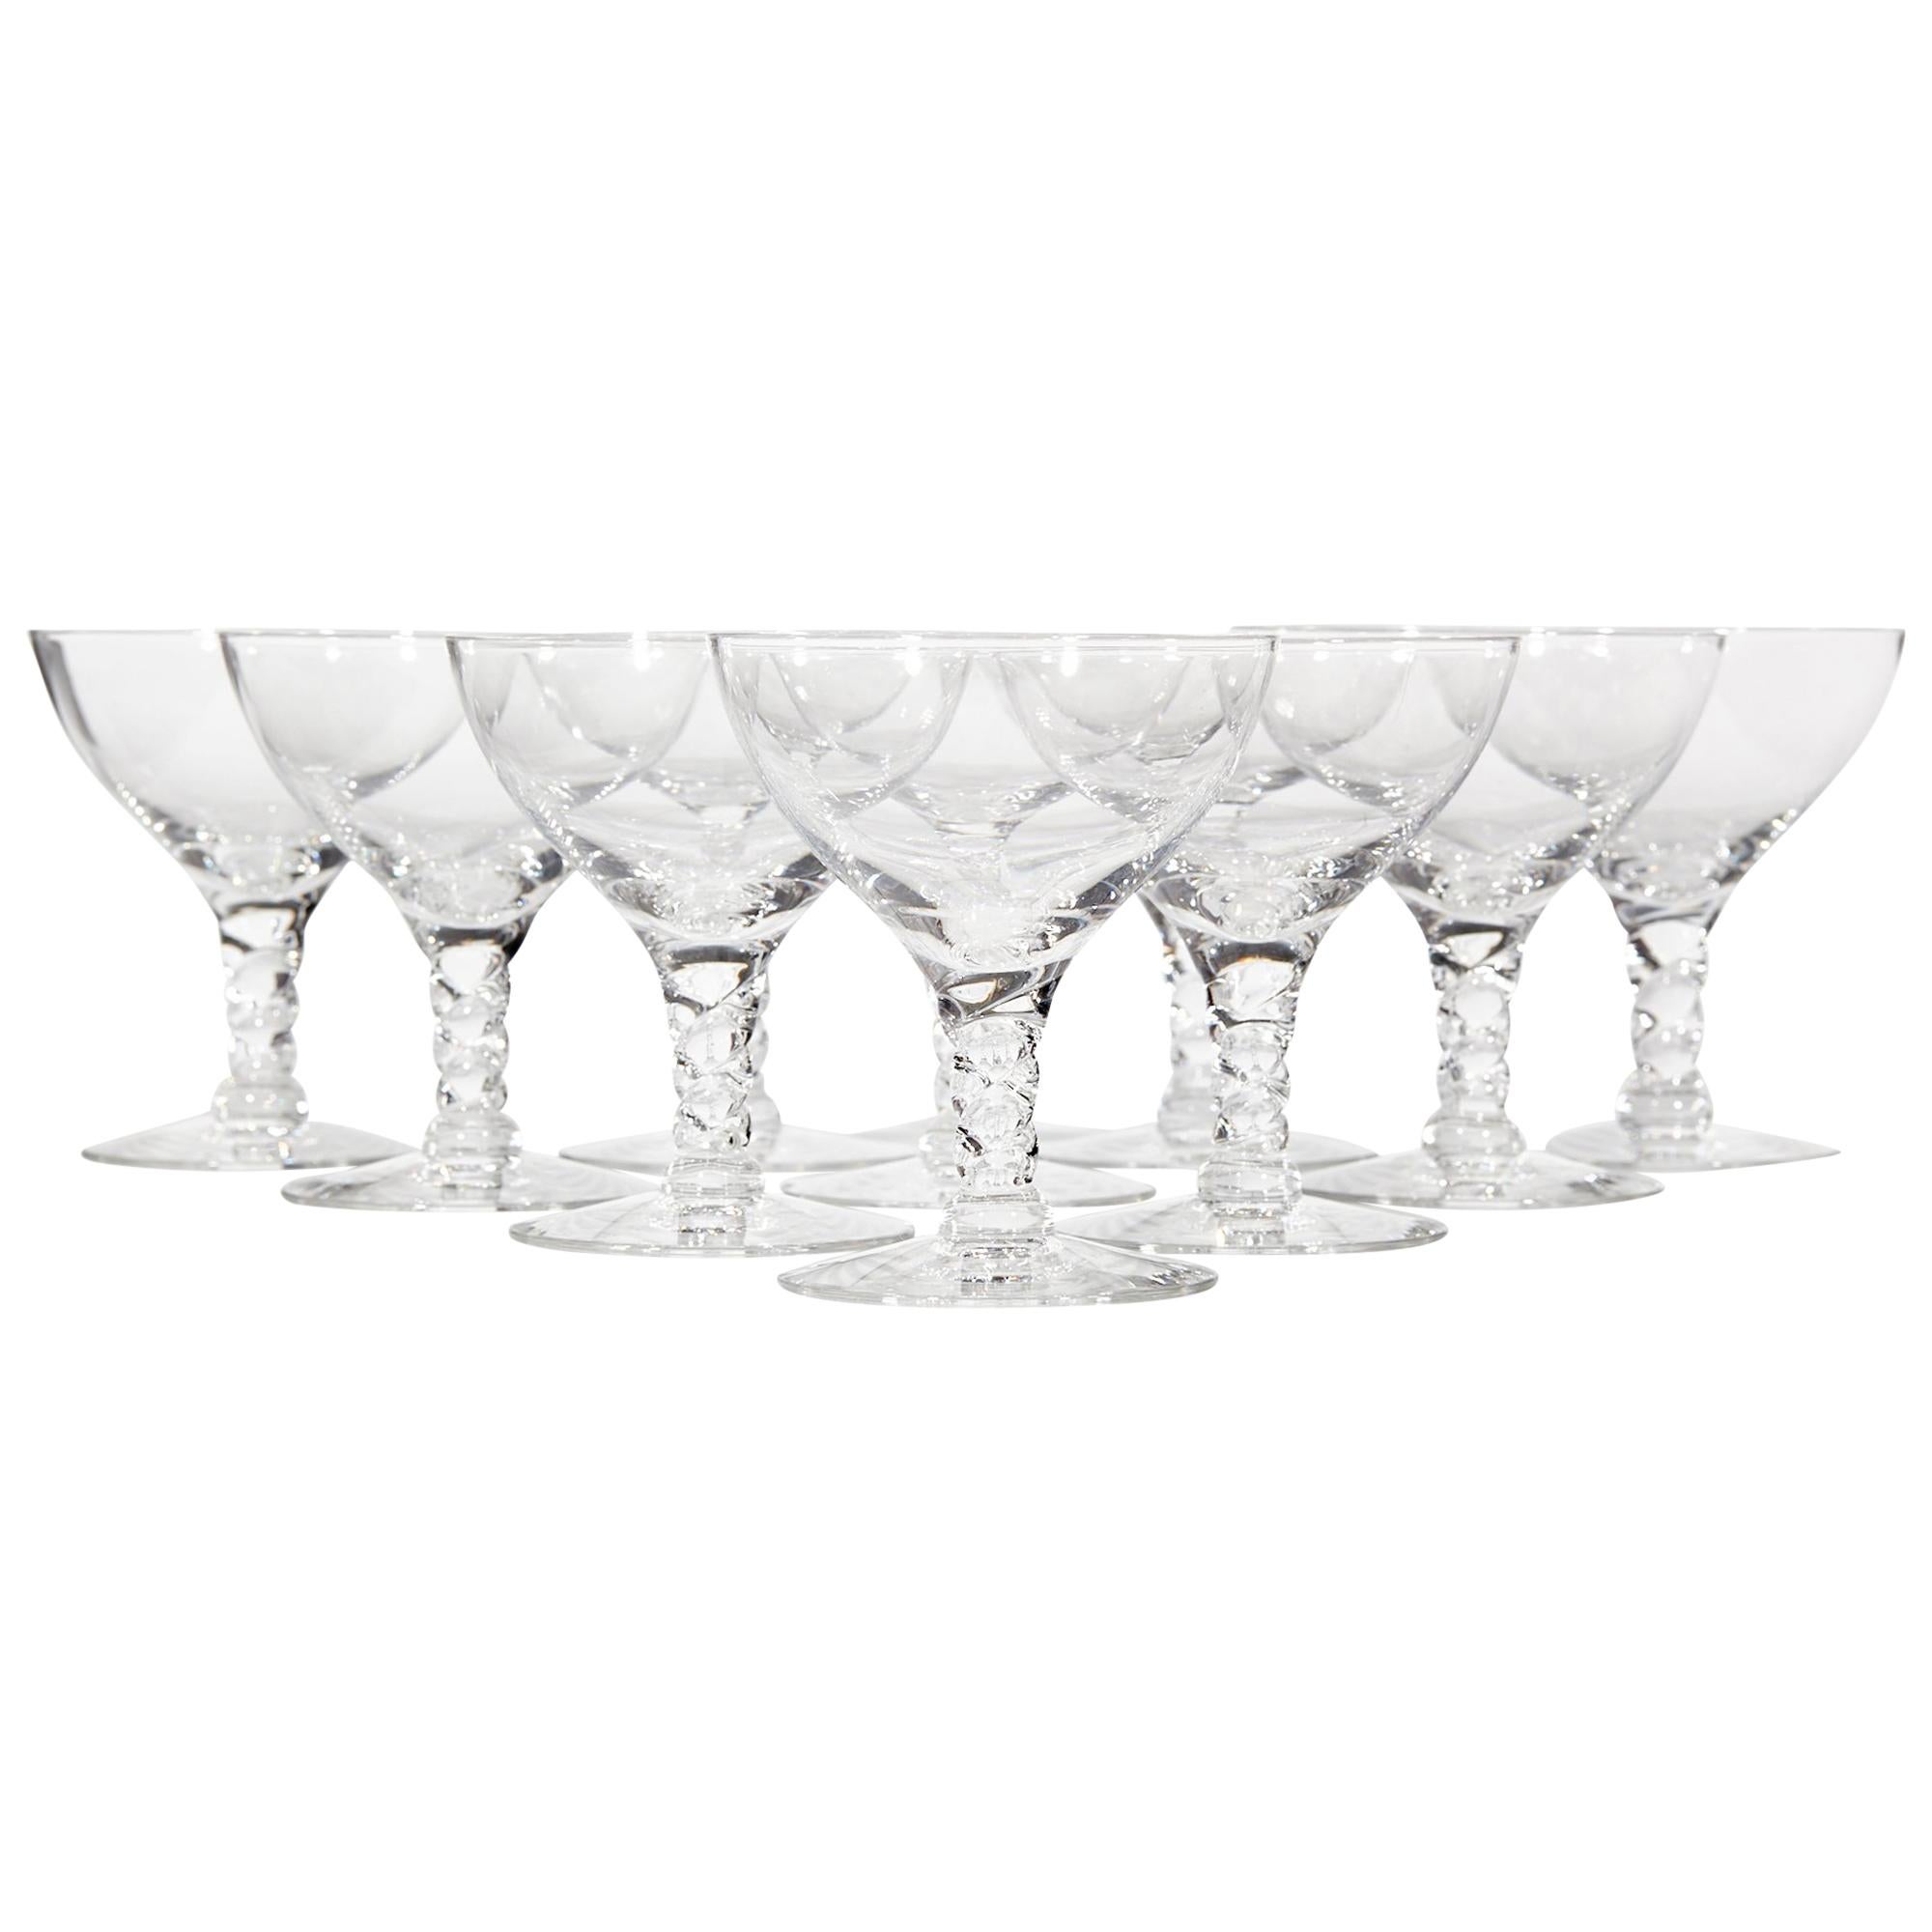 1960s Twist Stems Glass Coupes, Set of 10